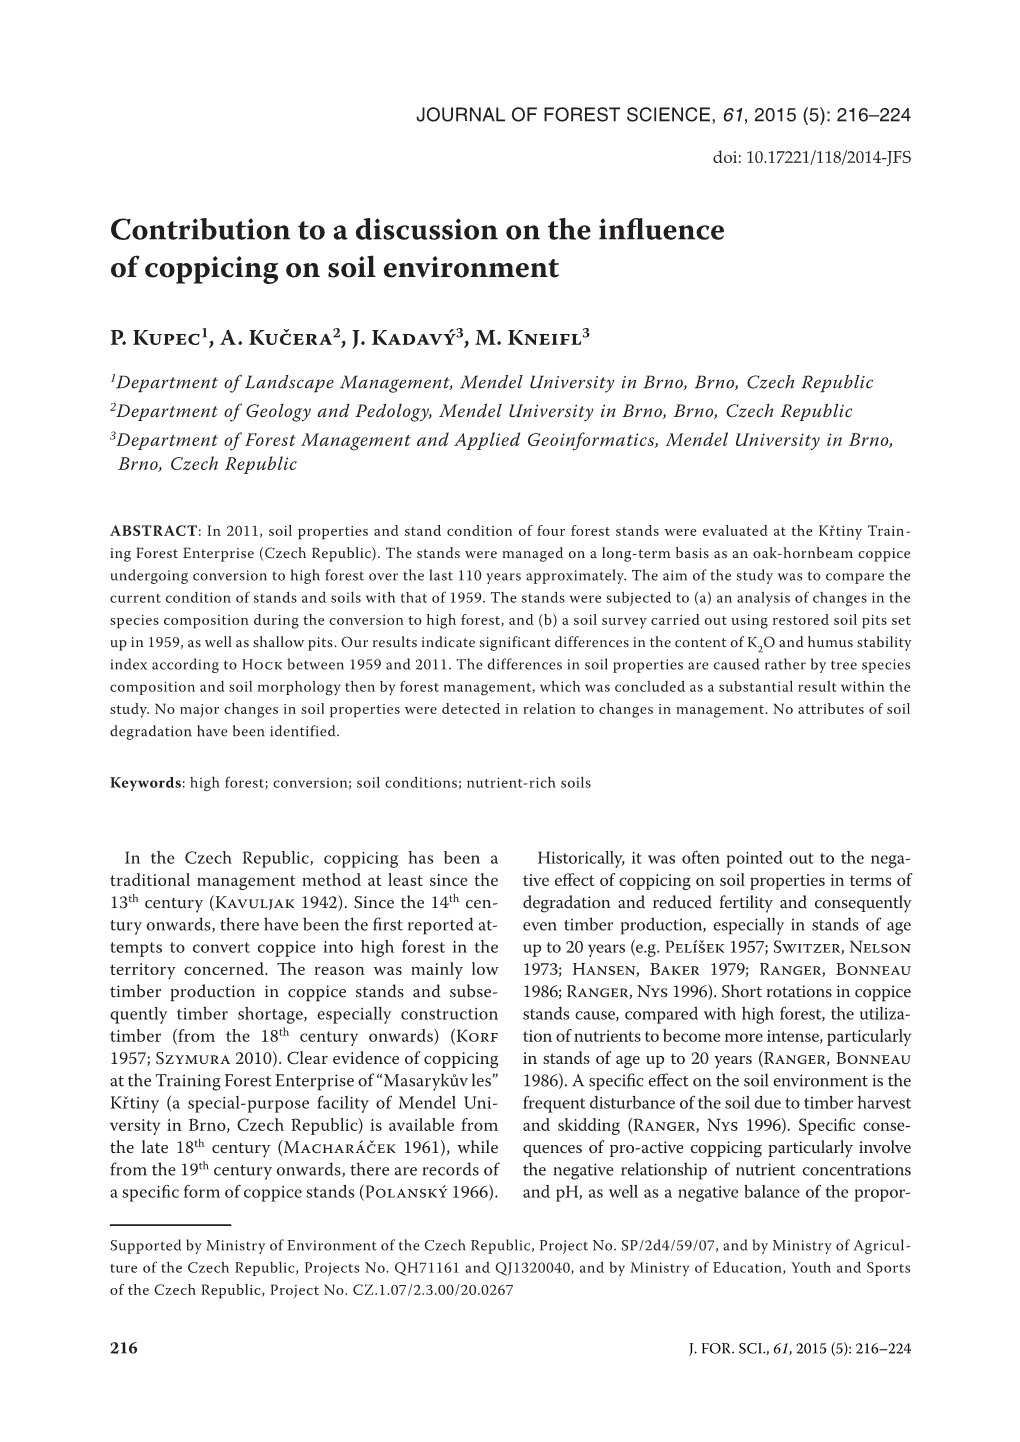 Contribution to a Discussion on the Influence of Coppicing on Soil Environment